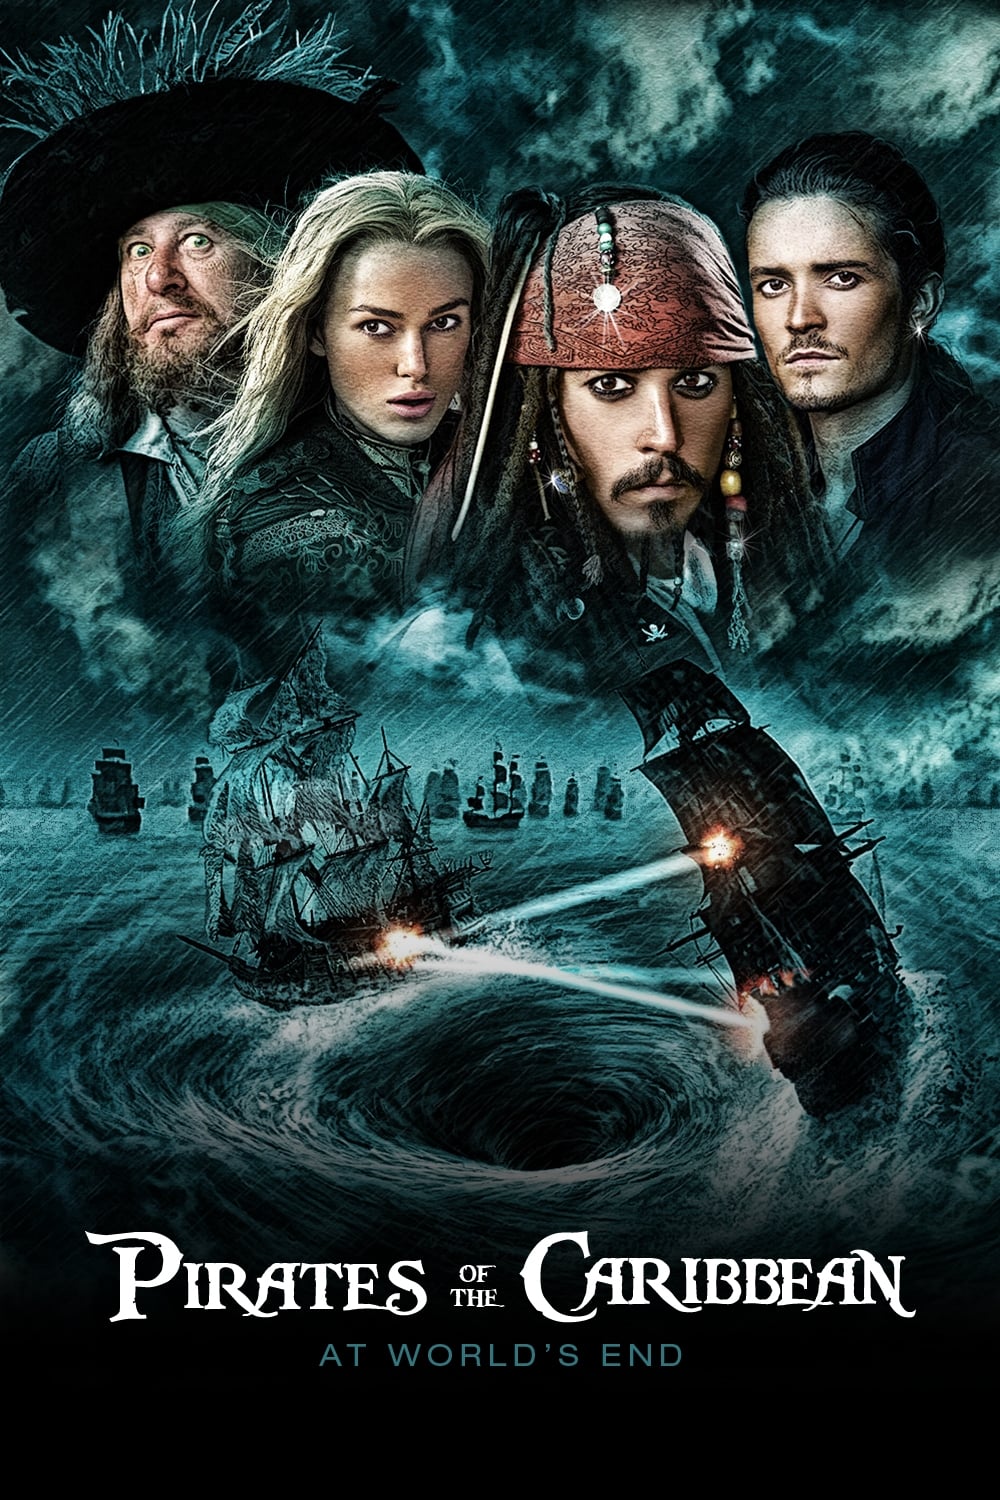 Watch Pirates of the Caribbean: At World's End (2007) Full Movie Online - Watch Pirates Of The Caribbean 2 Free Online